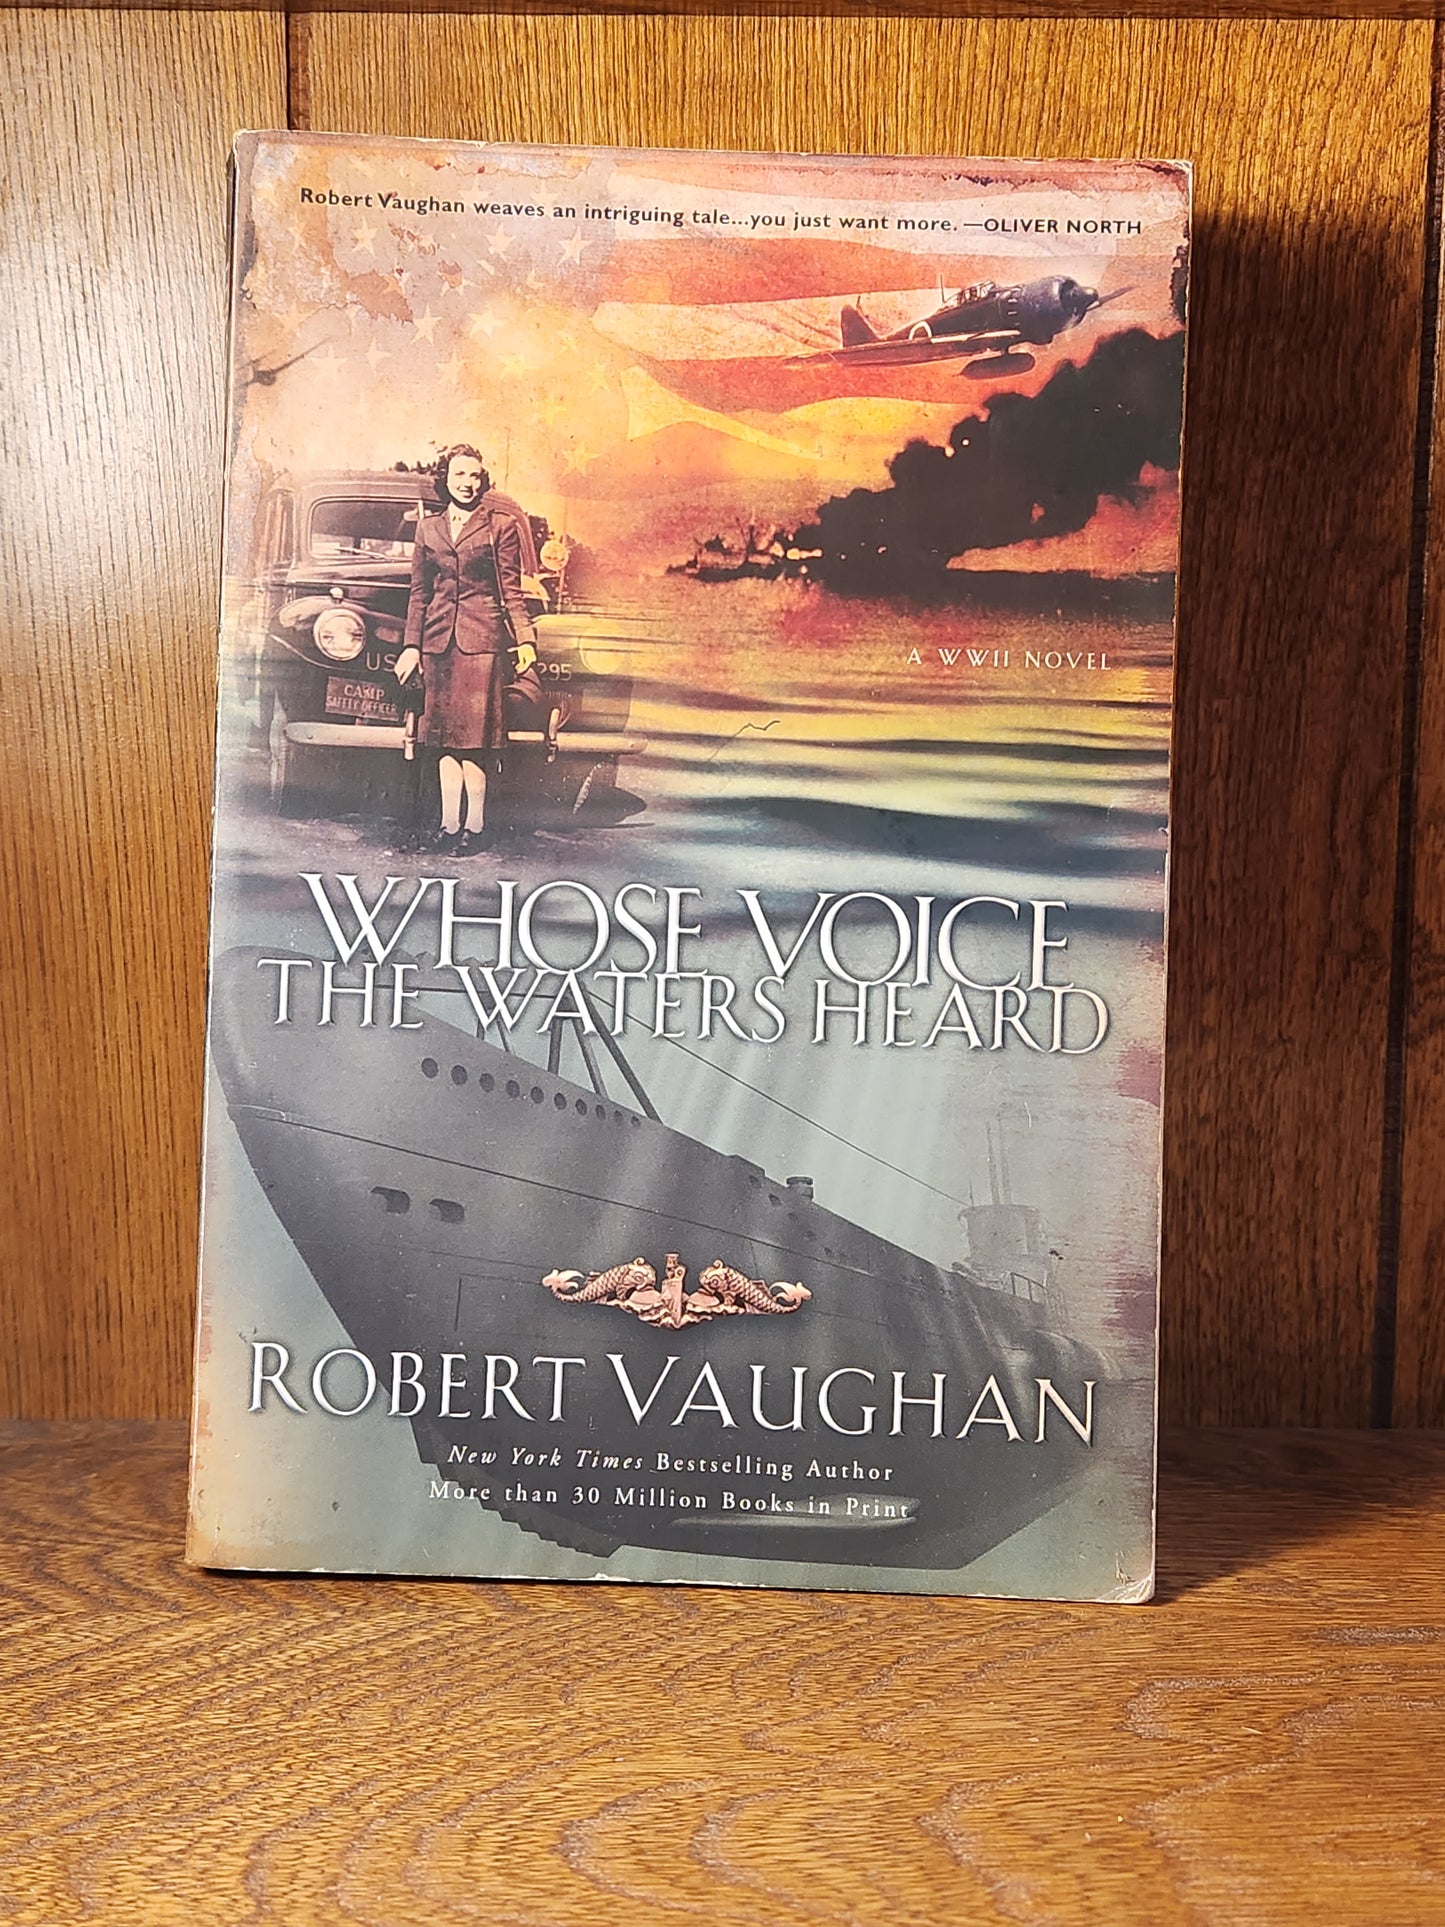 "Whose Voice the Waters Heard" by Robert Vaughan